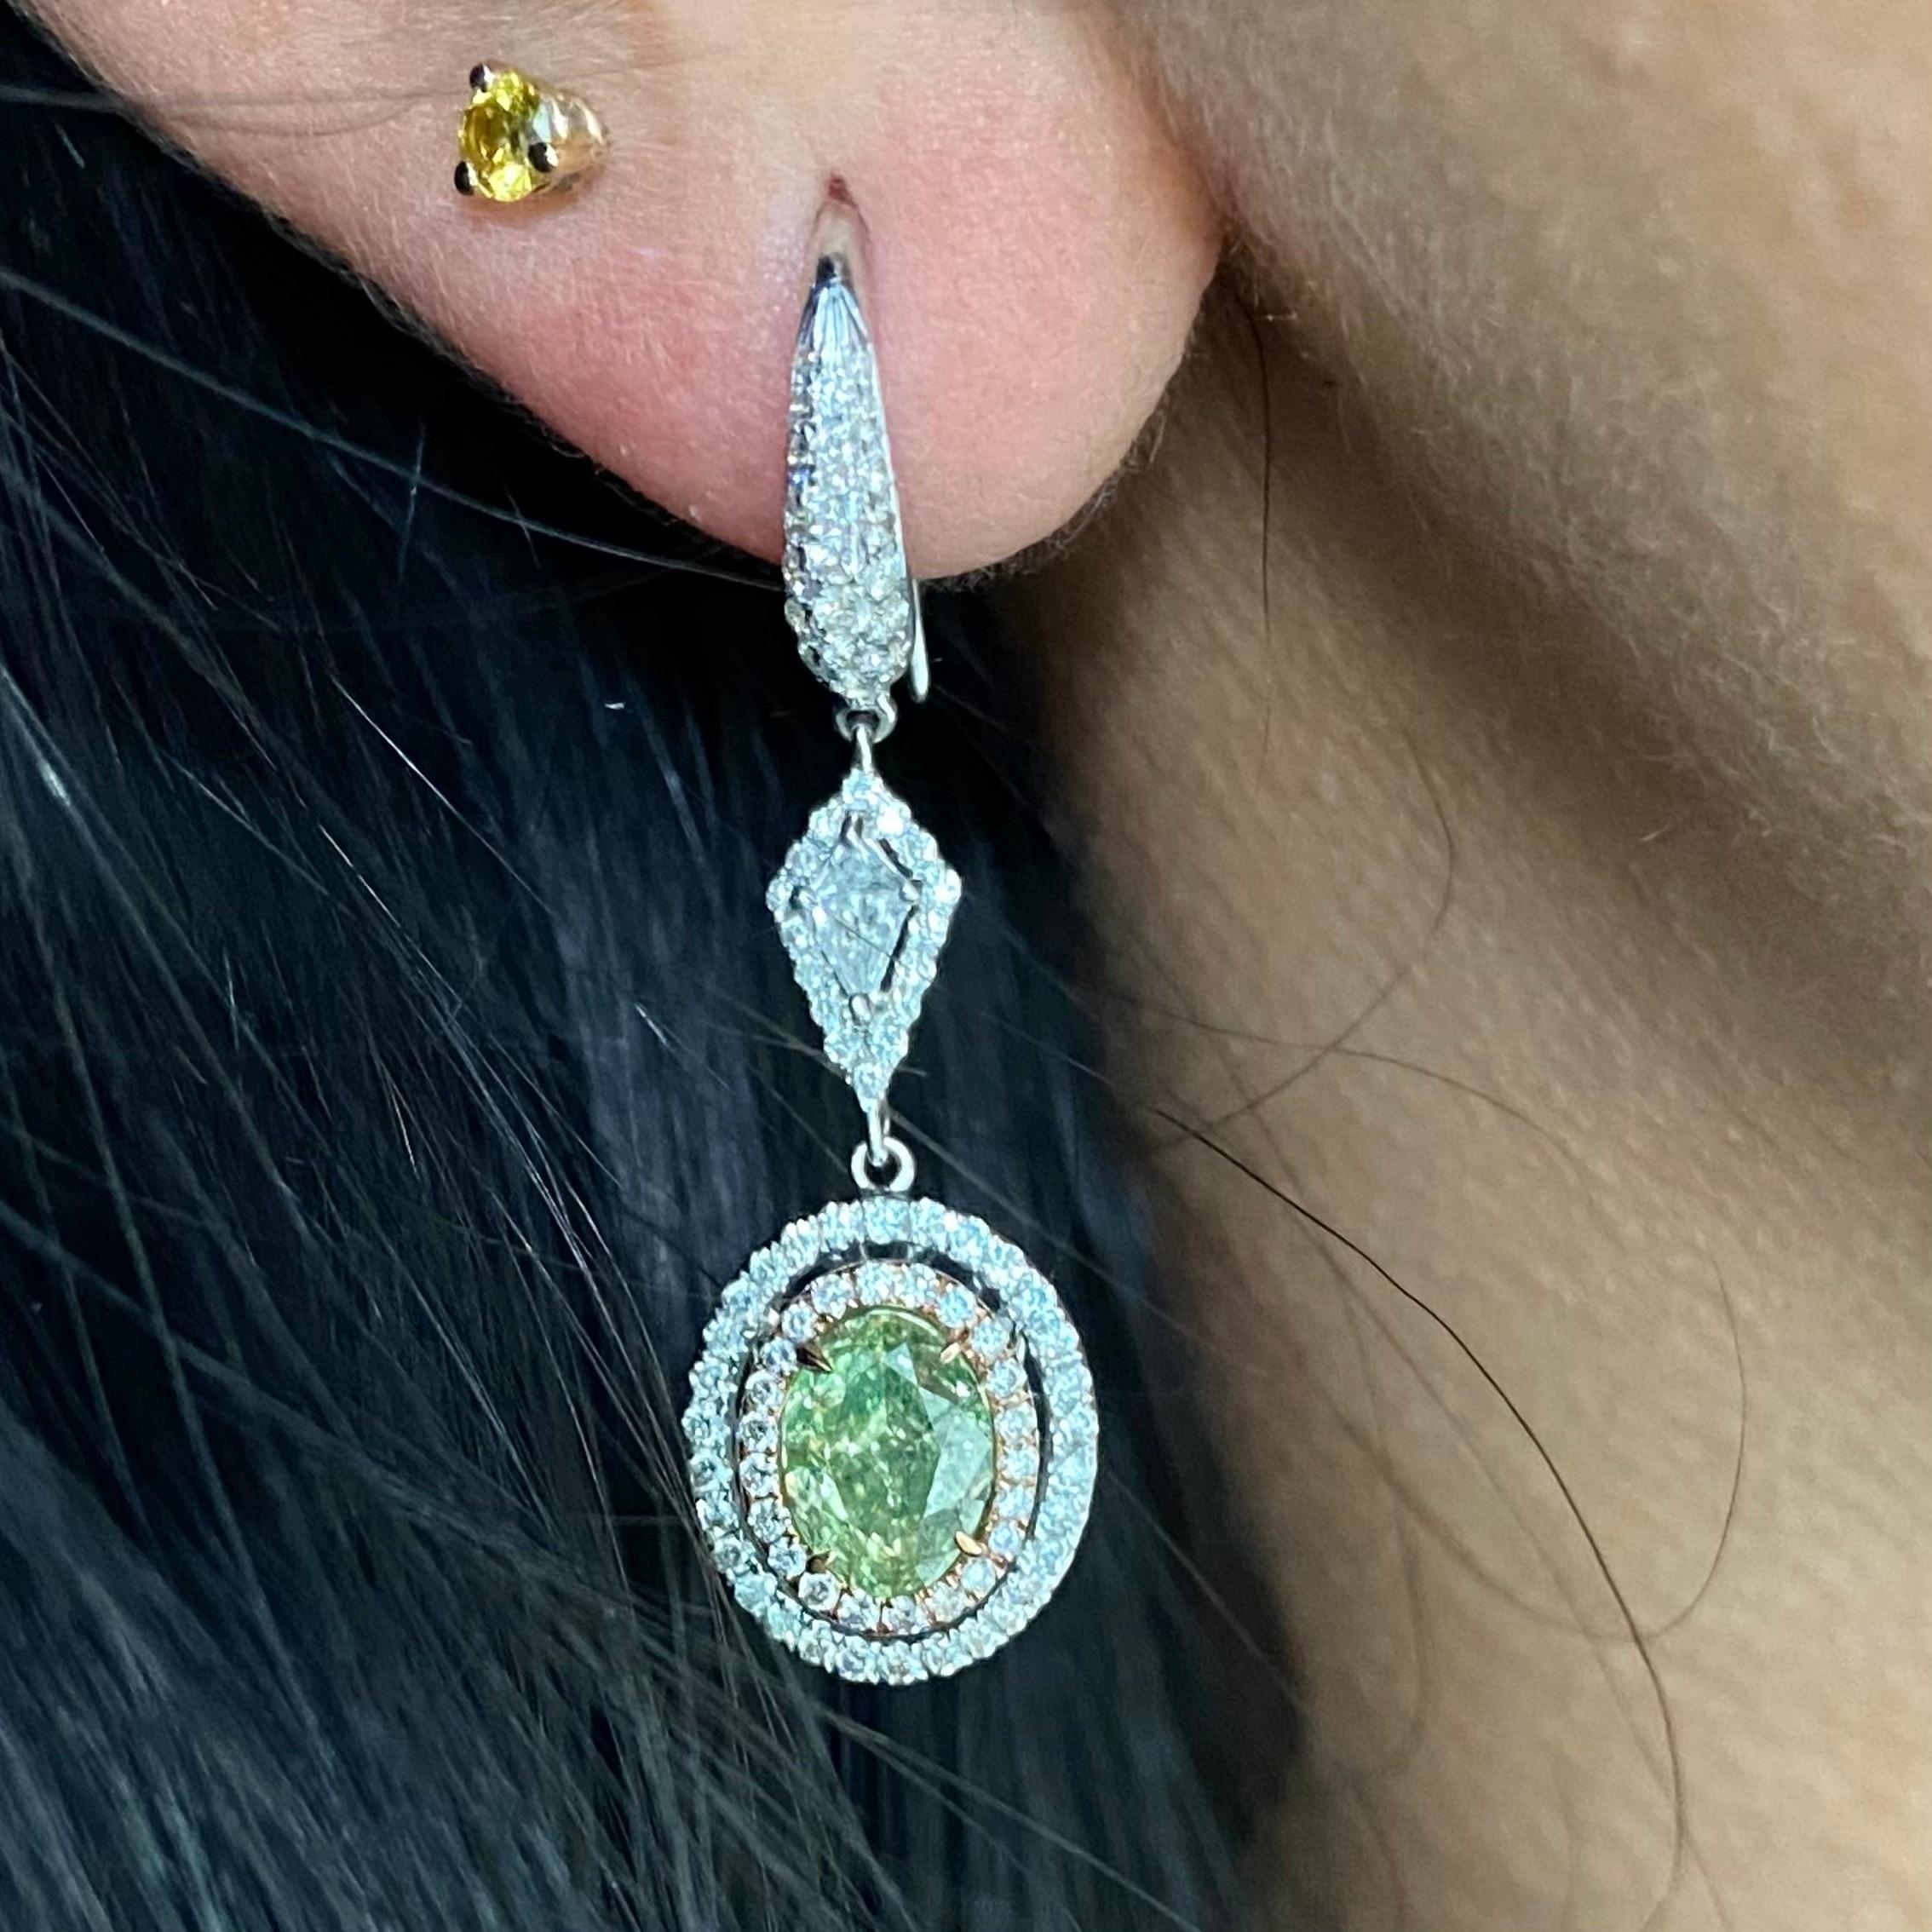 1.00 Carat and 1.05 Carat Center Oval Cut Diamonds
GIA Certified Fancy Greenish Yellow Diamonds
SI1 and SI2 Clarity
1.15 Carat surrounding white diamonds
3.20 Carat Total Weight
18k White Gold
Handmade in NYC  

This piece can be viewed before